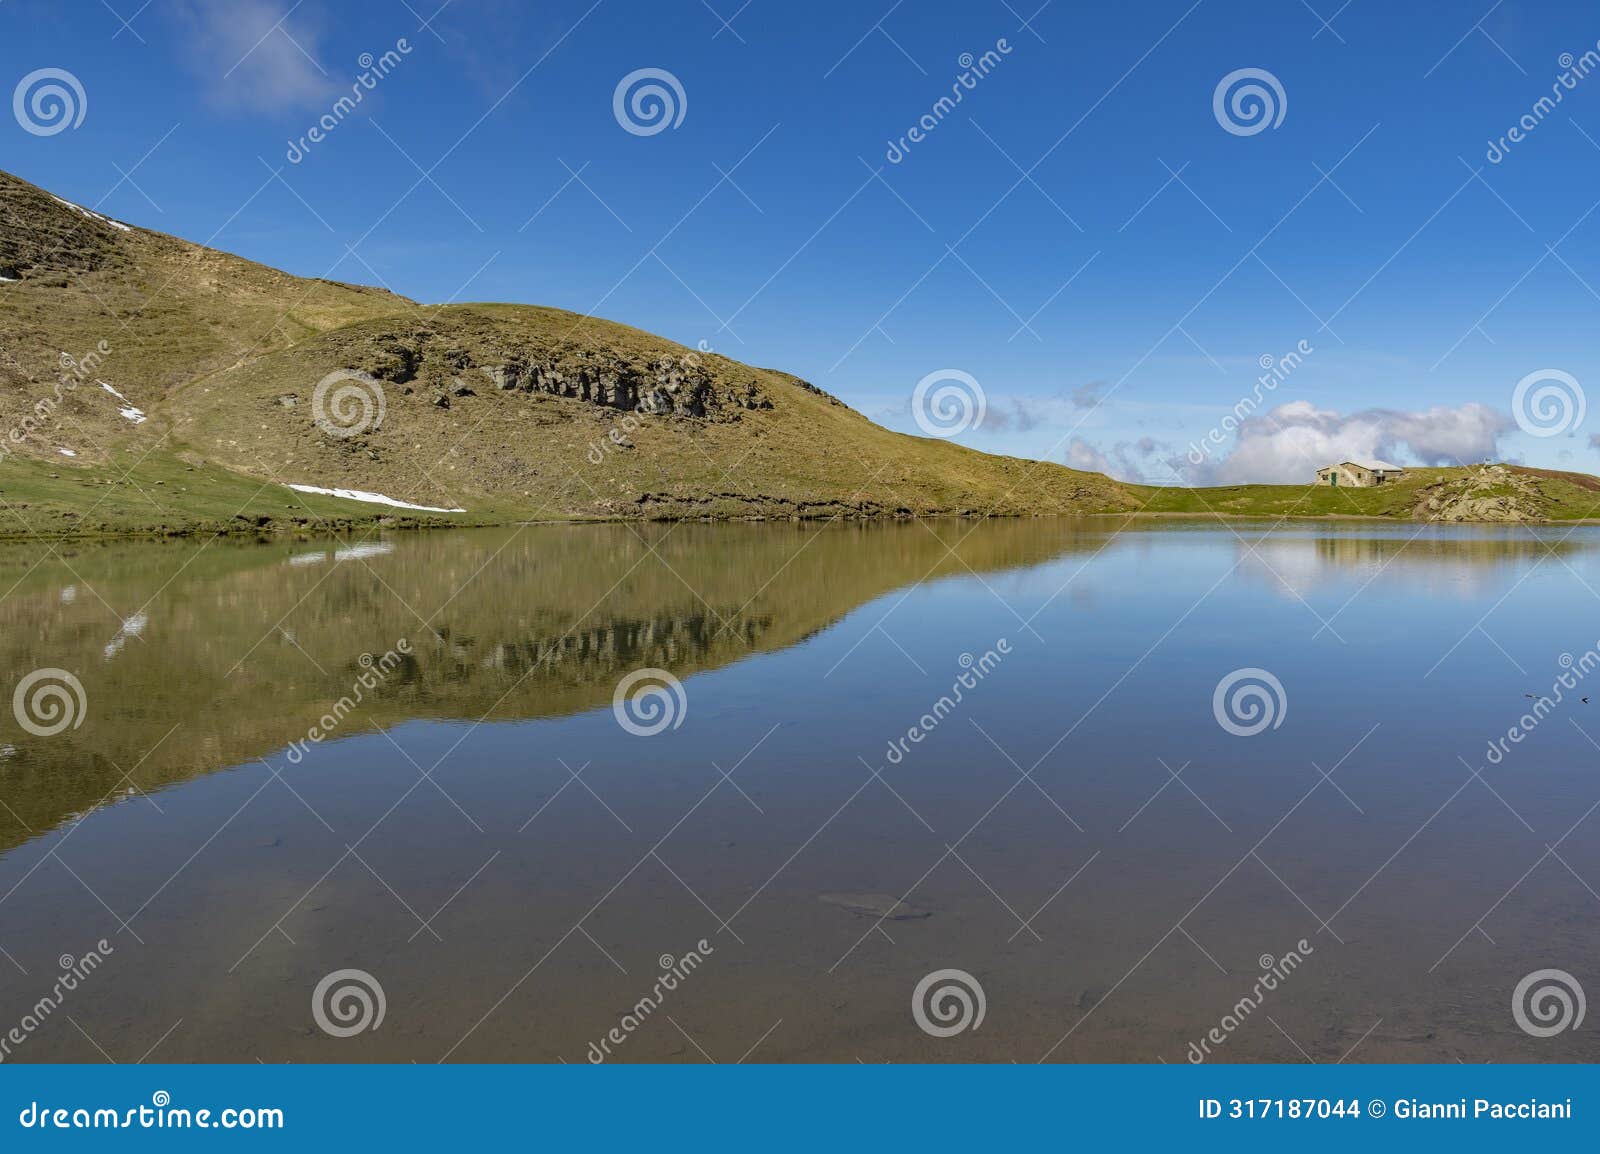 lake scaffaiolo and its reflections in may